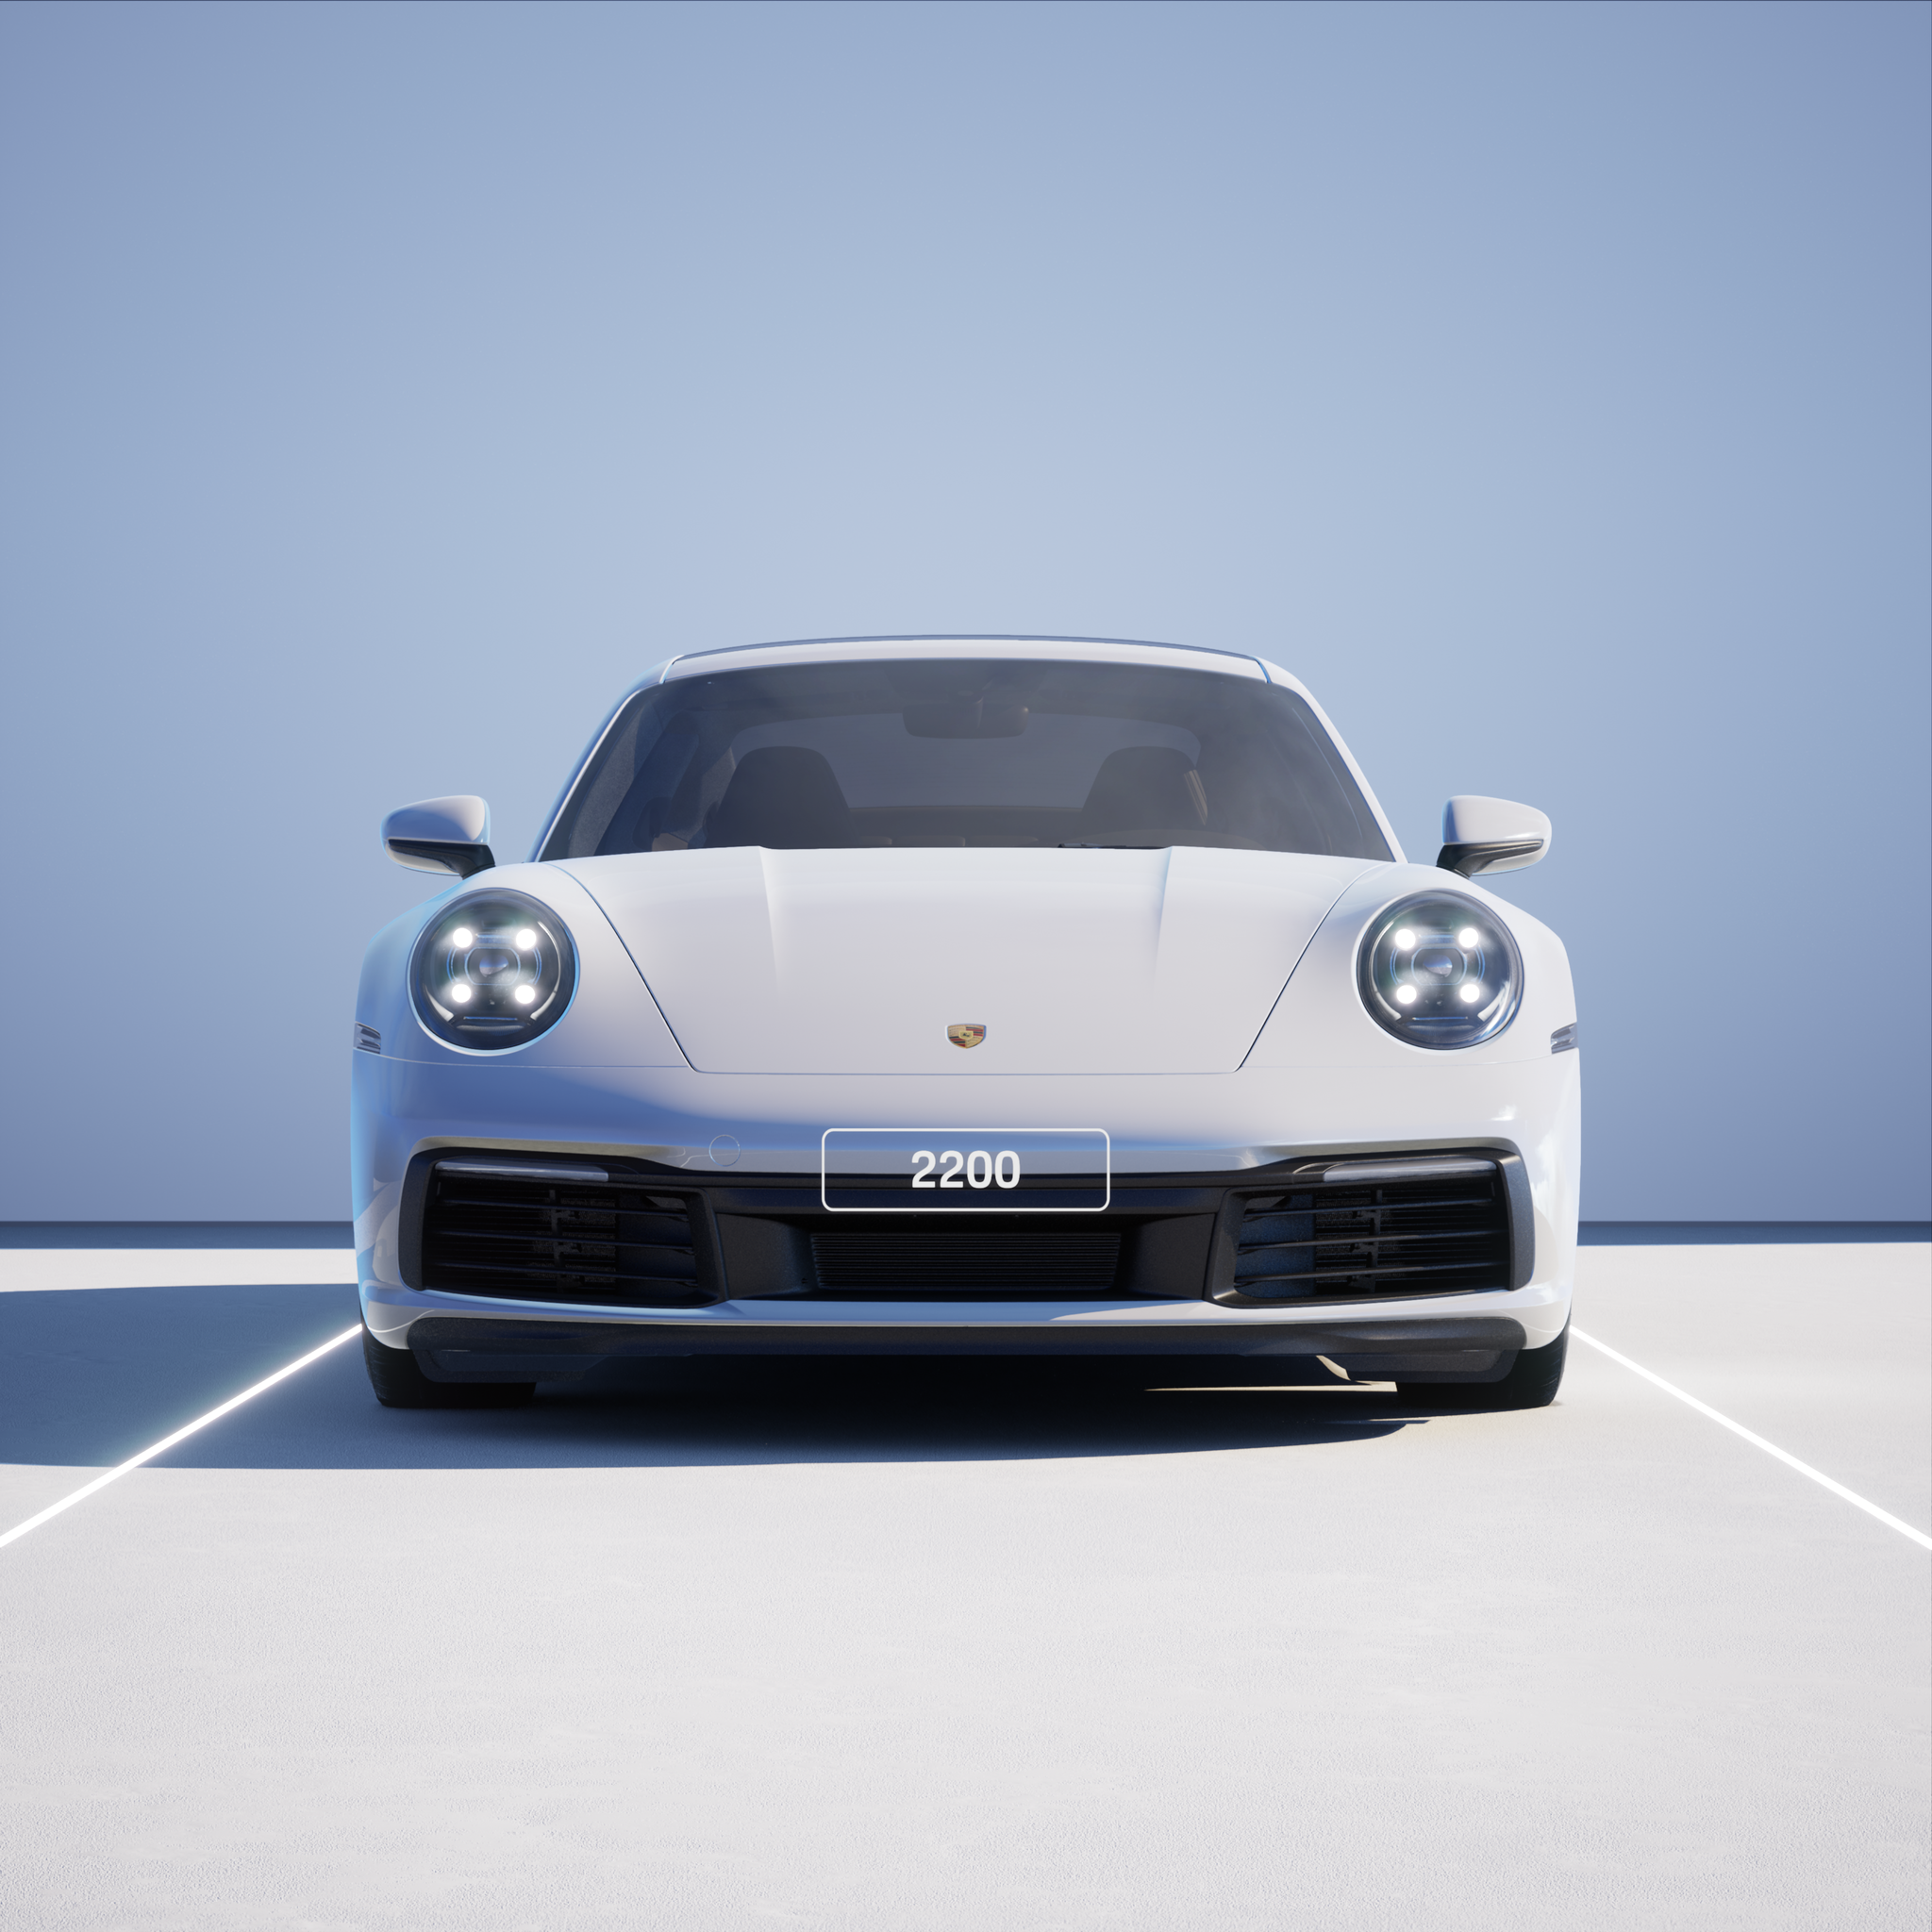 The PORSCHΞ 911 2200 image in phase